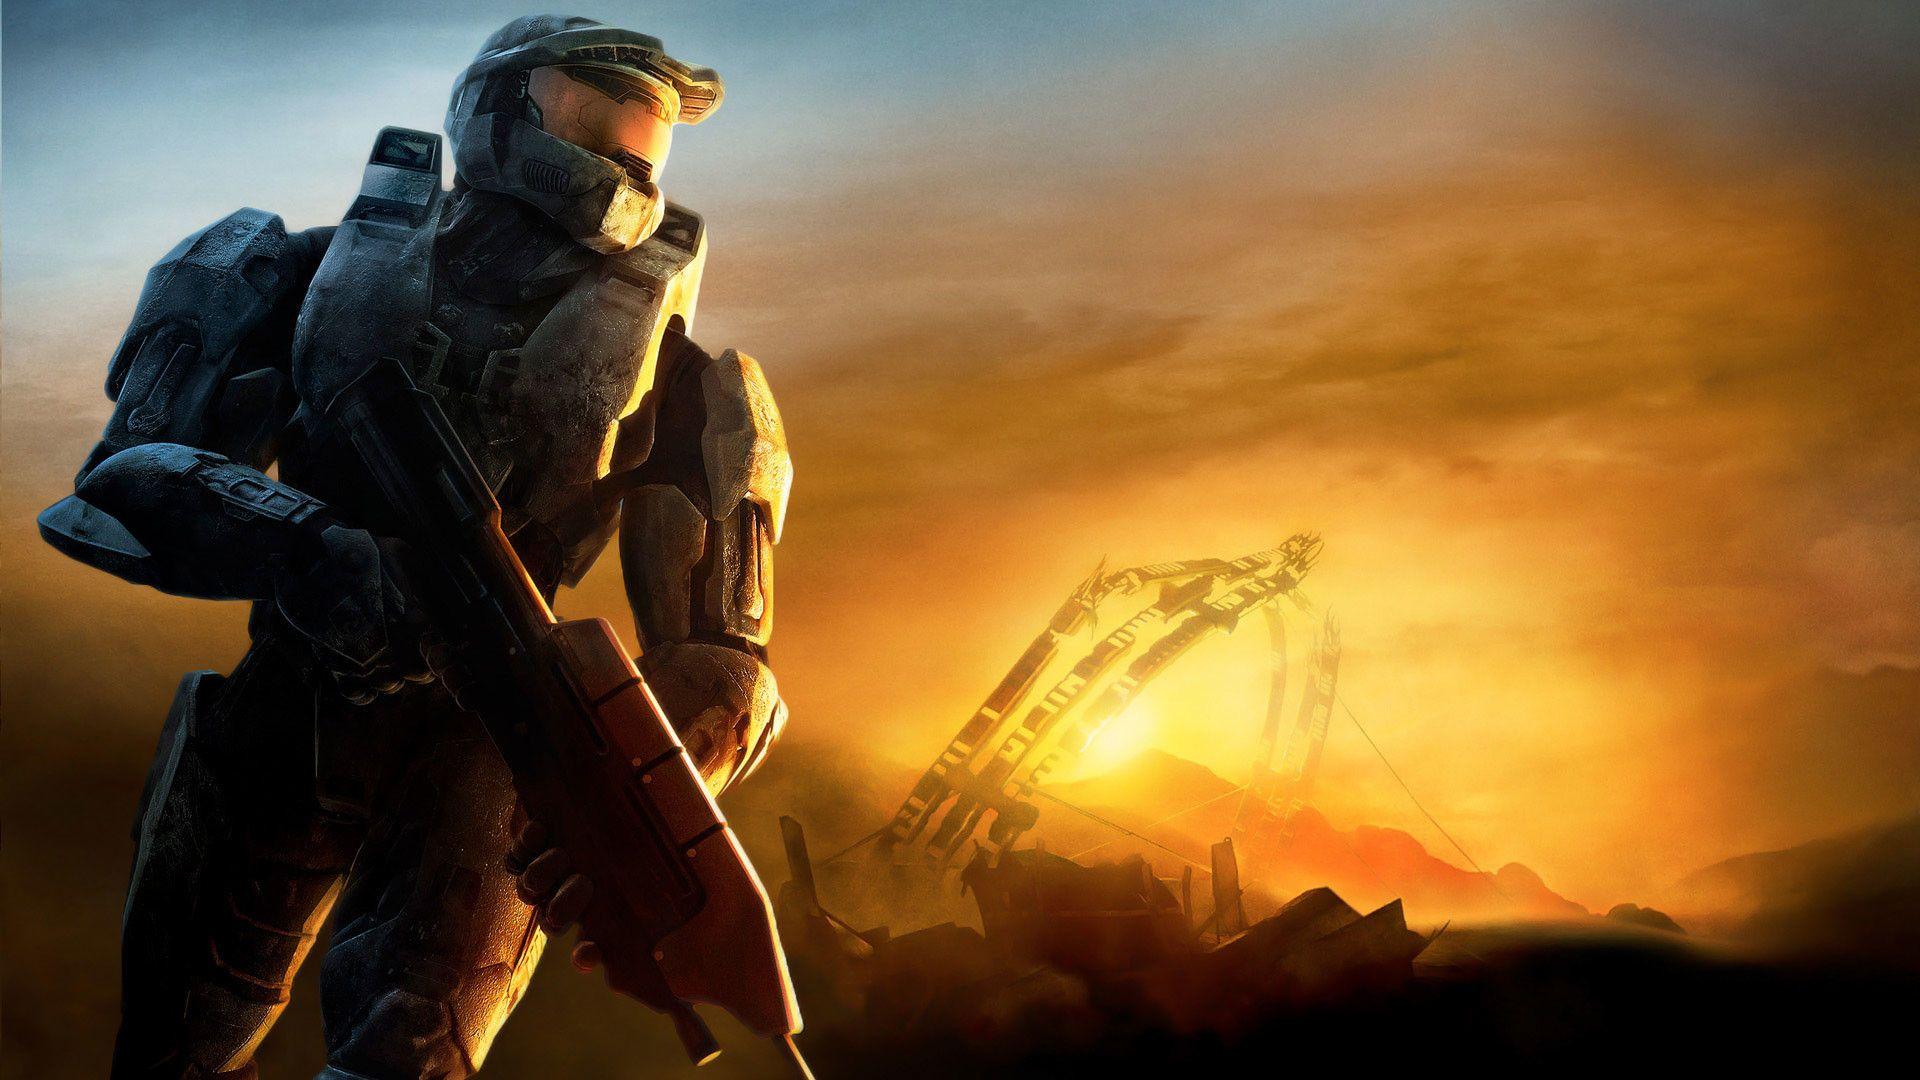 Halo wallpapers hd p